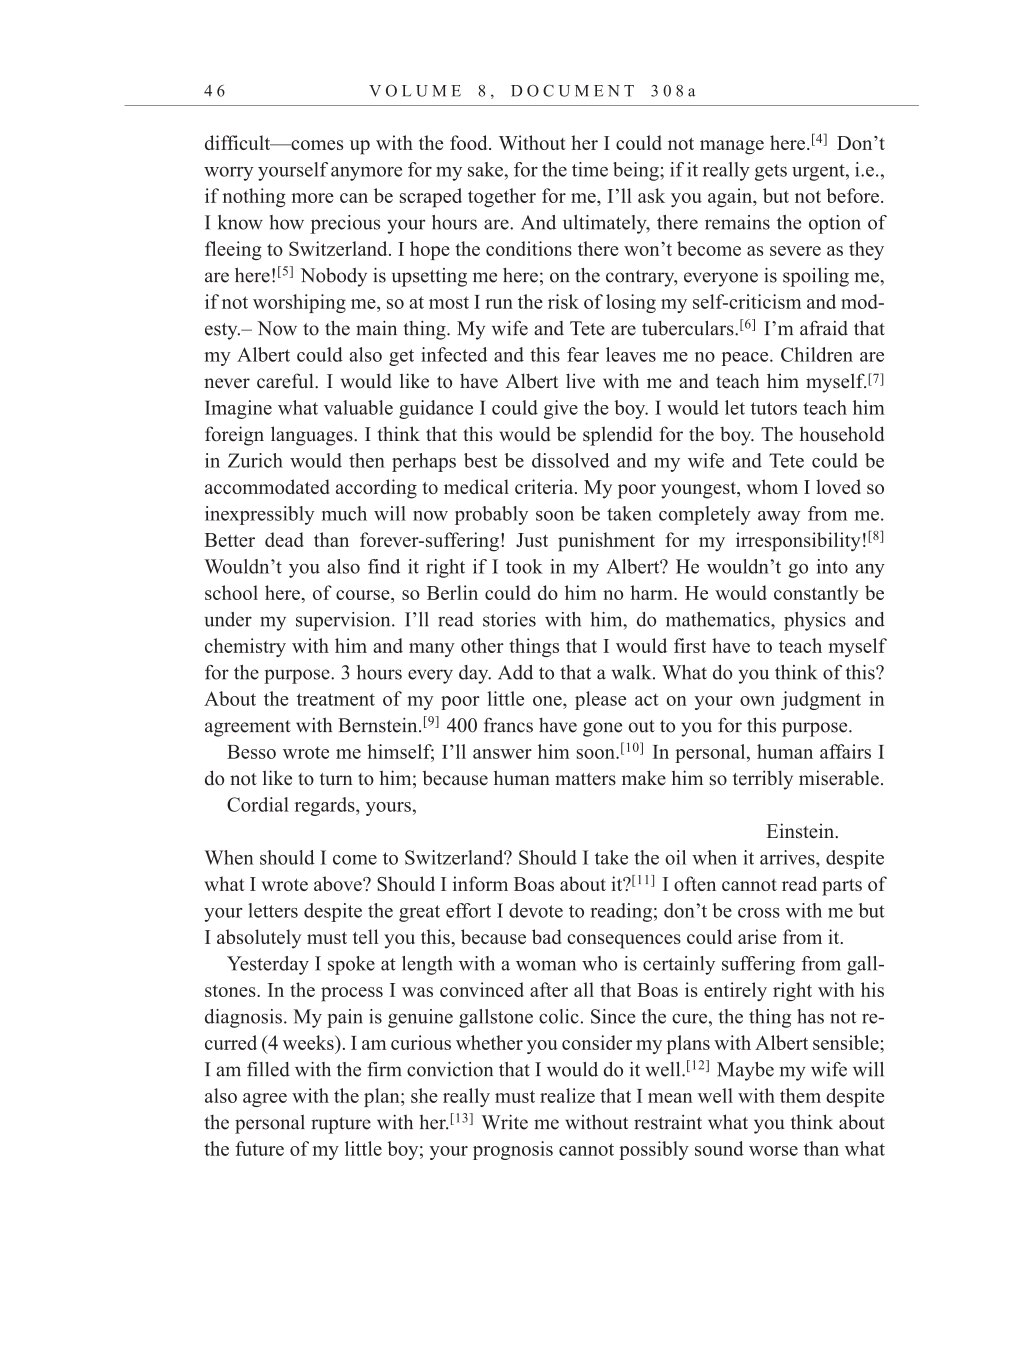 Volume 10: The Berlin Years: Correspondence, May-December 1920, and Supplementary Correspondence, 1909-1920 (English translation supplement) page 46